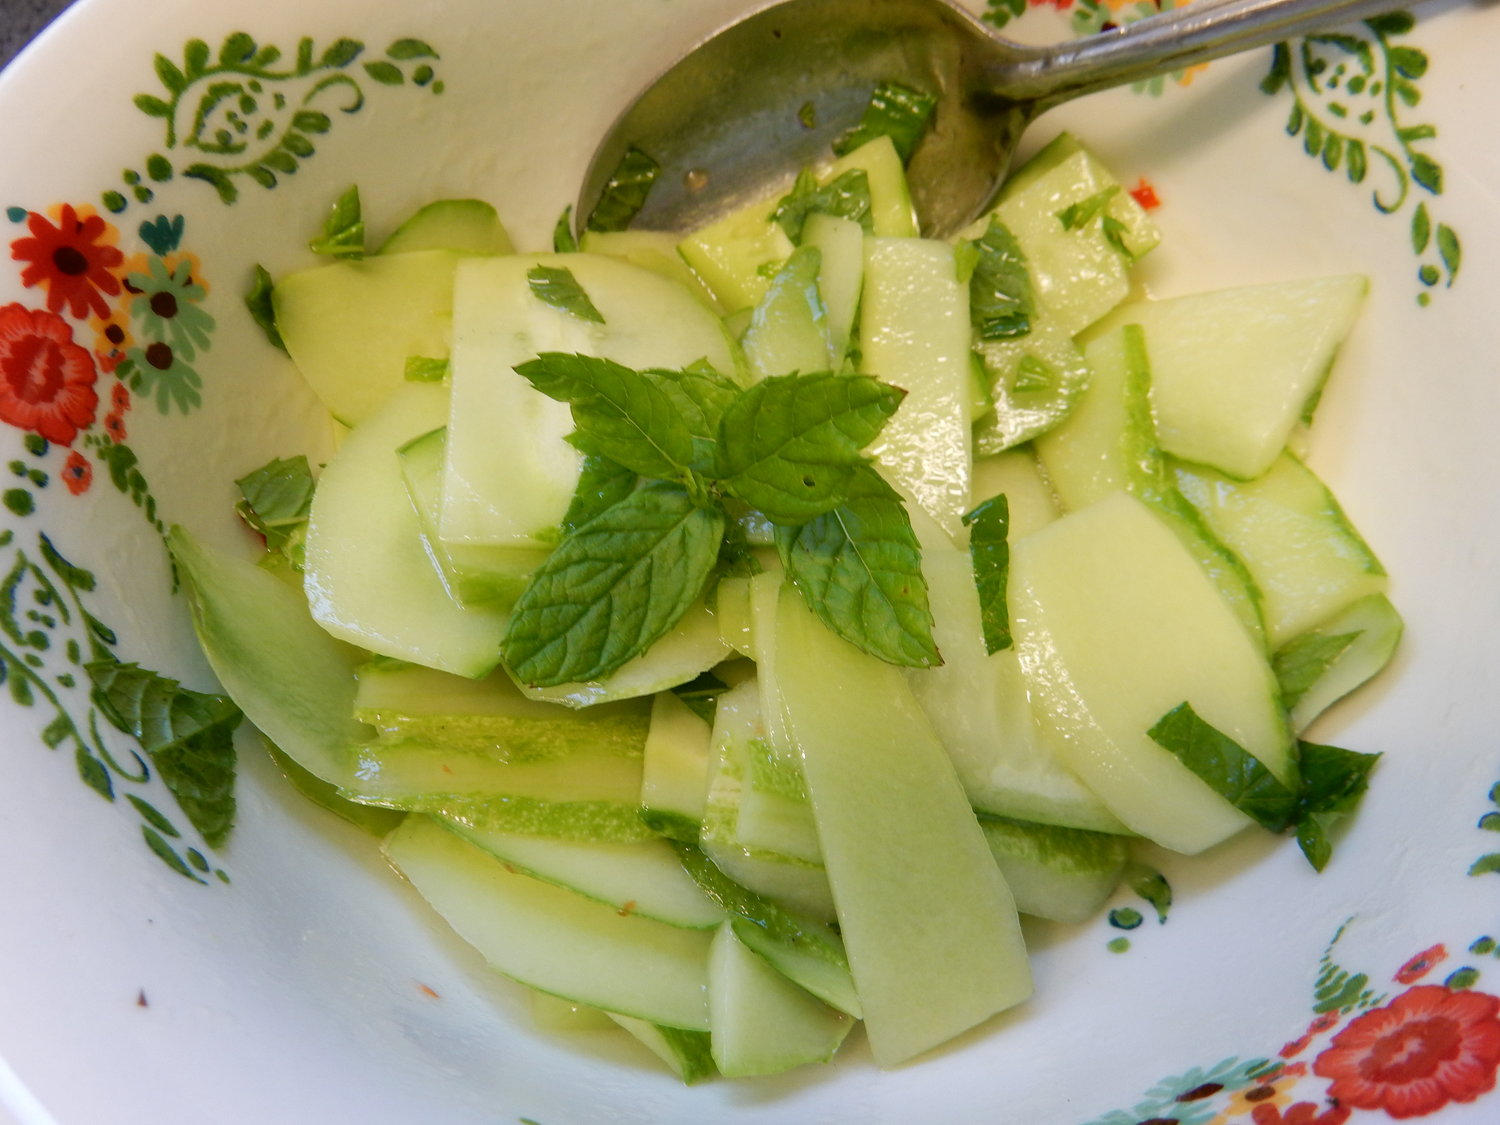 A kirby cucumber salad with fresh mint.